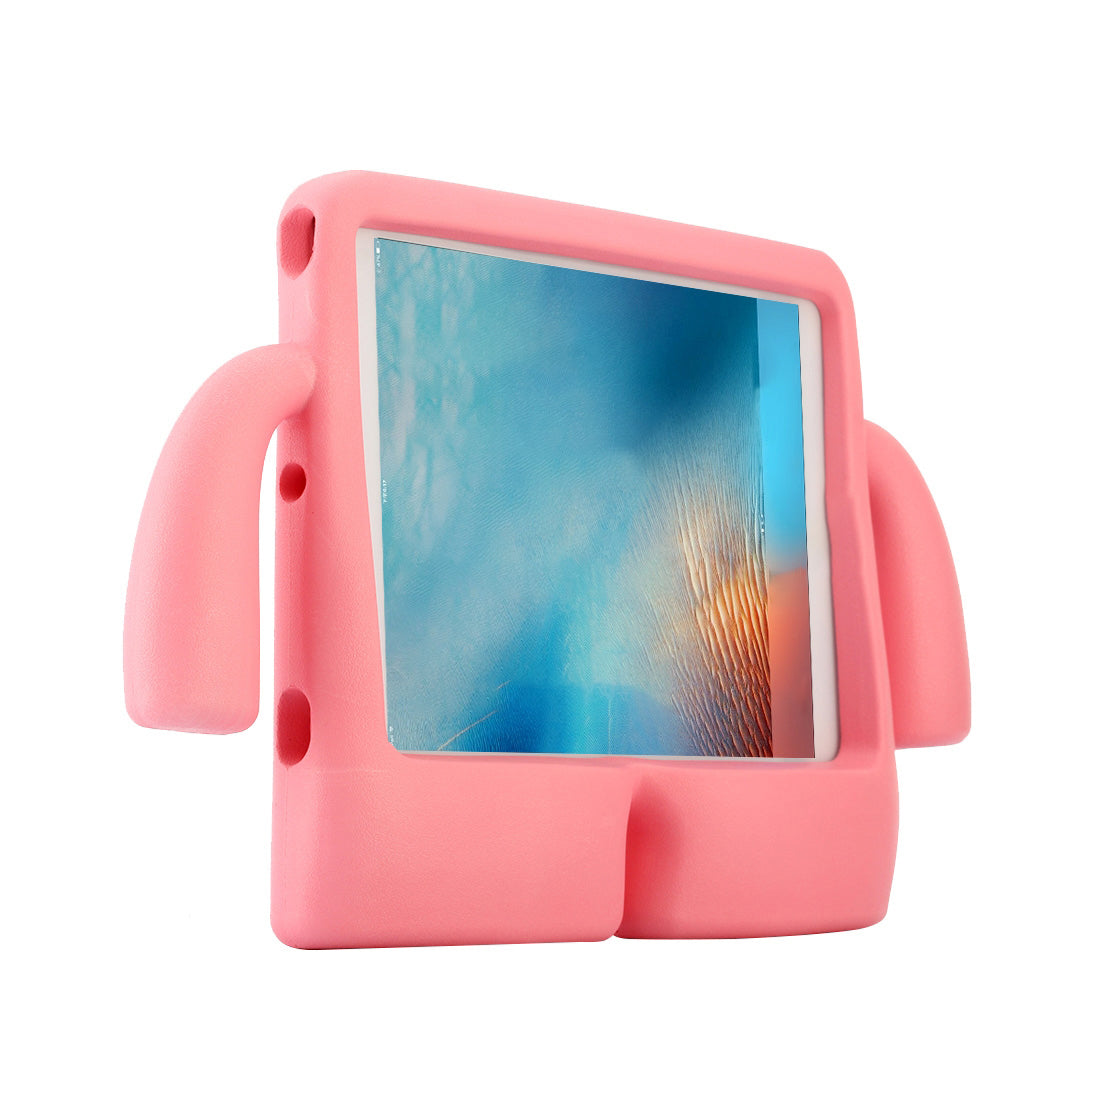 For Samsung Galaxy Tab A 8.0 2019 Kids Case Shockproof Cover With Carry Handle - Pink